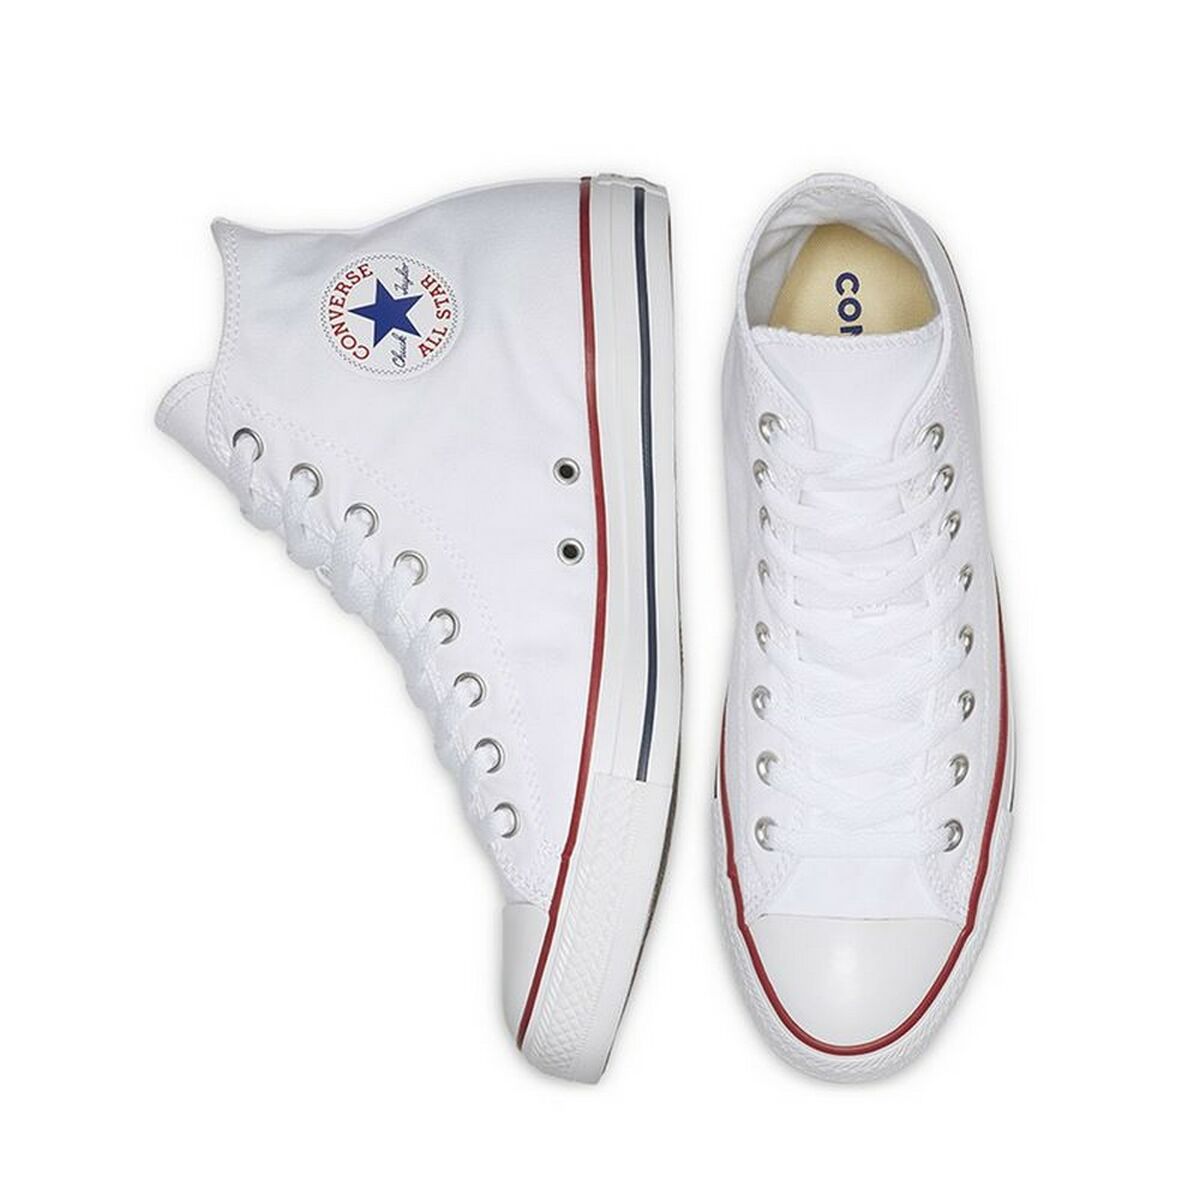 Women's casual trainers Converse Chuck Taylor All Star High White